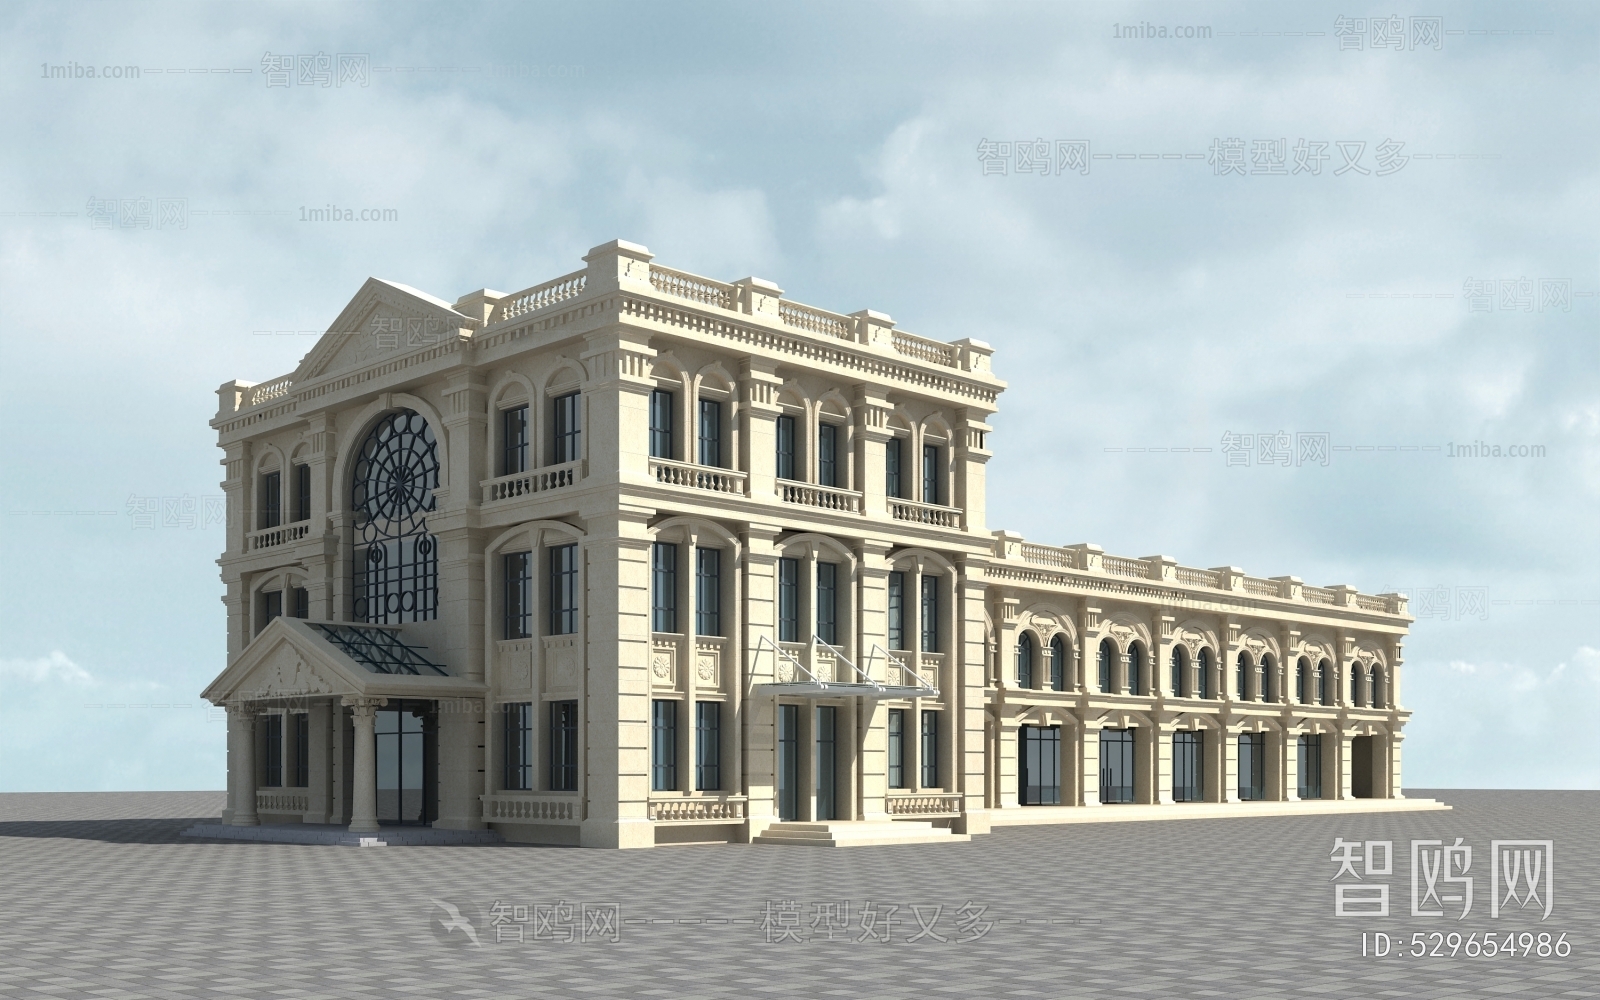 Simple European Style Appearance Of Commercial Building